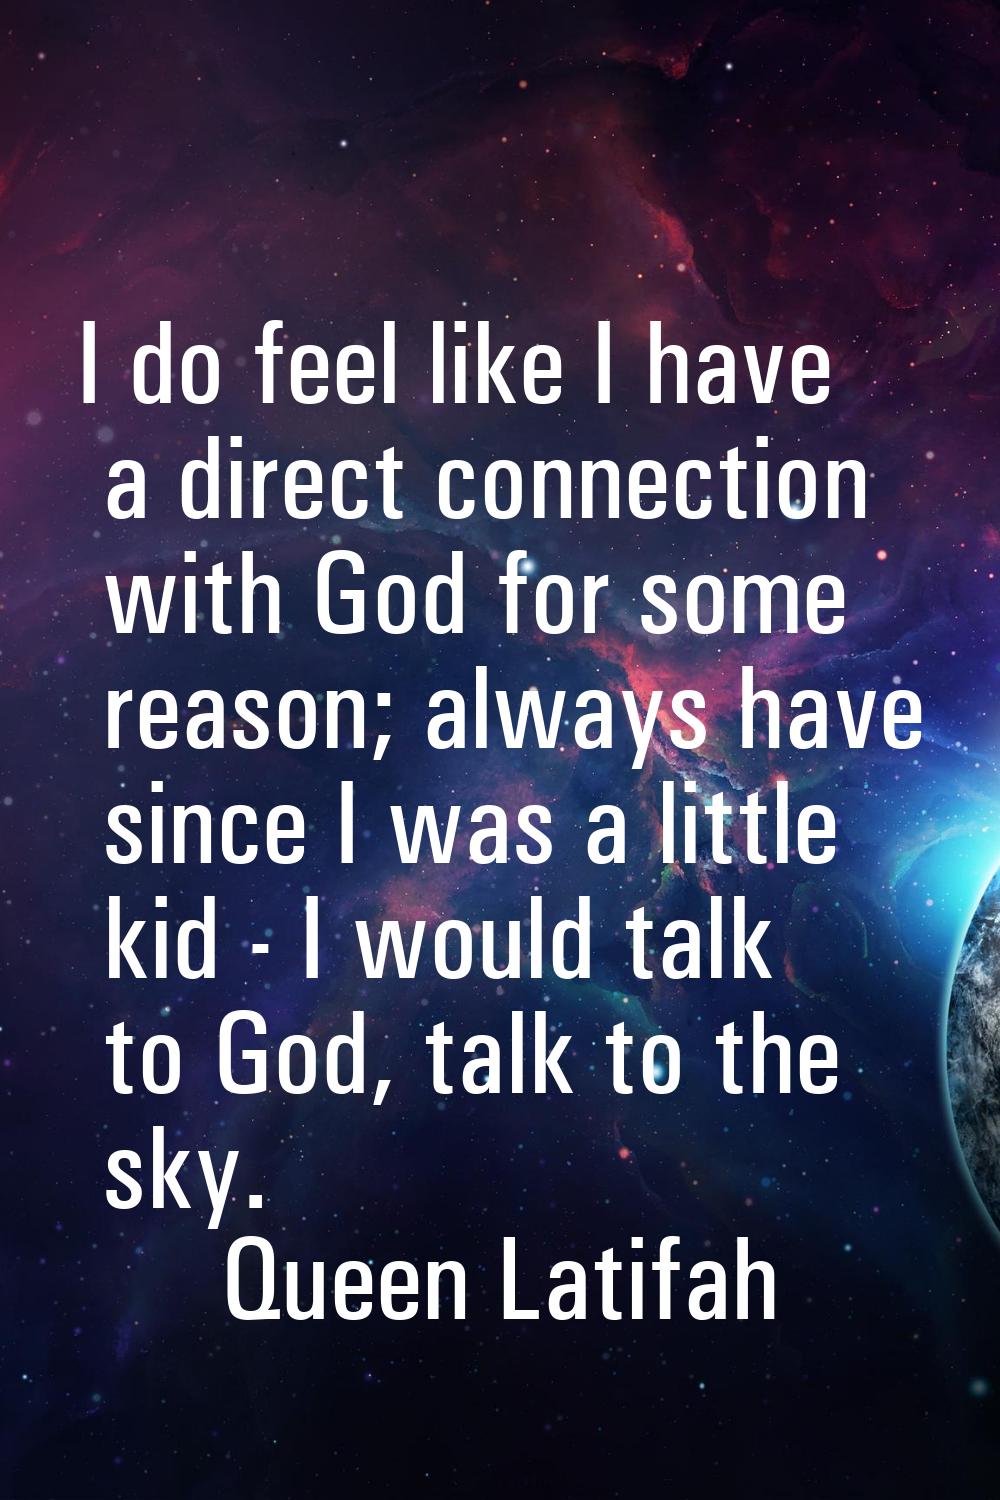 I do feel like I have a direct connection with God for some reason; always have since I was a littl